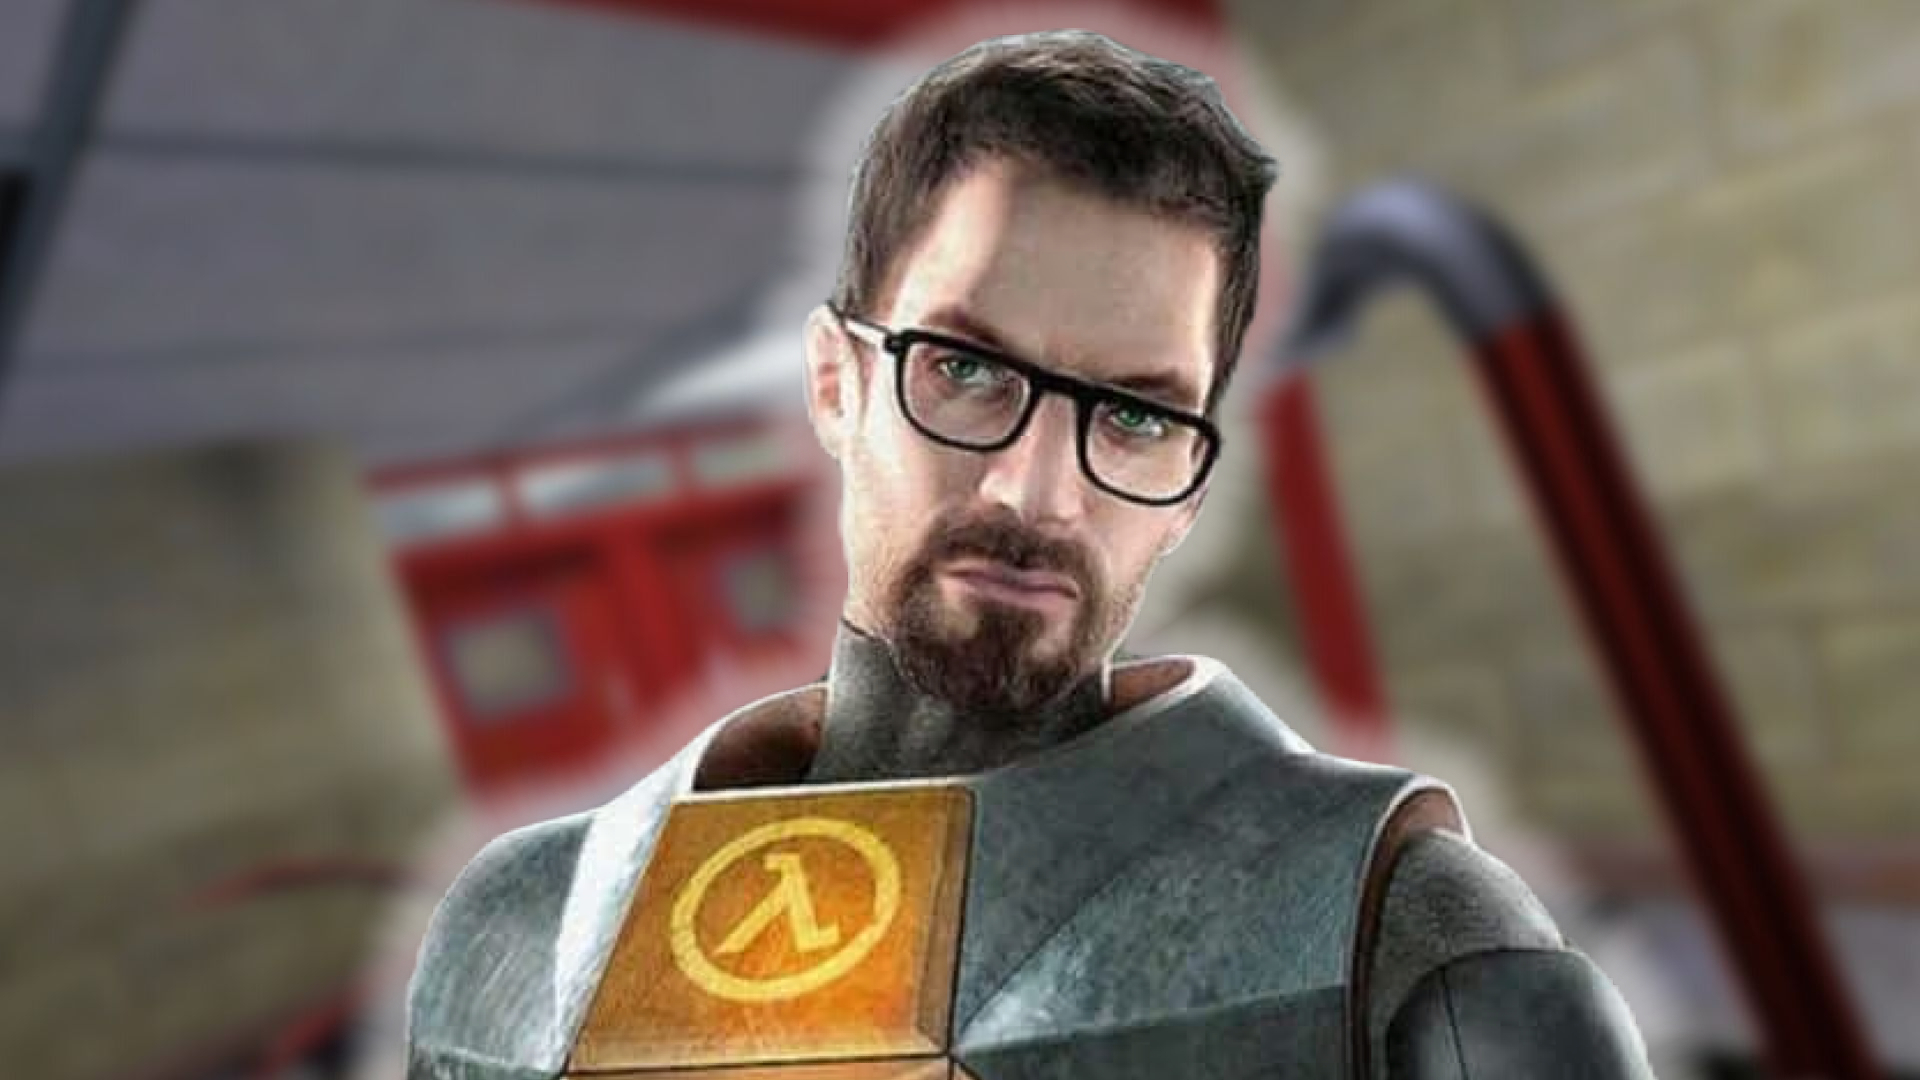 This Half-Life mod is an essential download while it's a free game